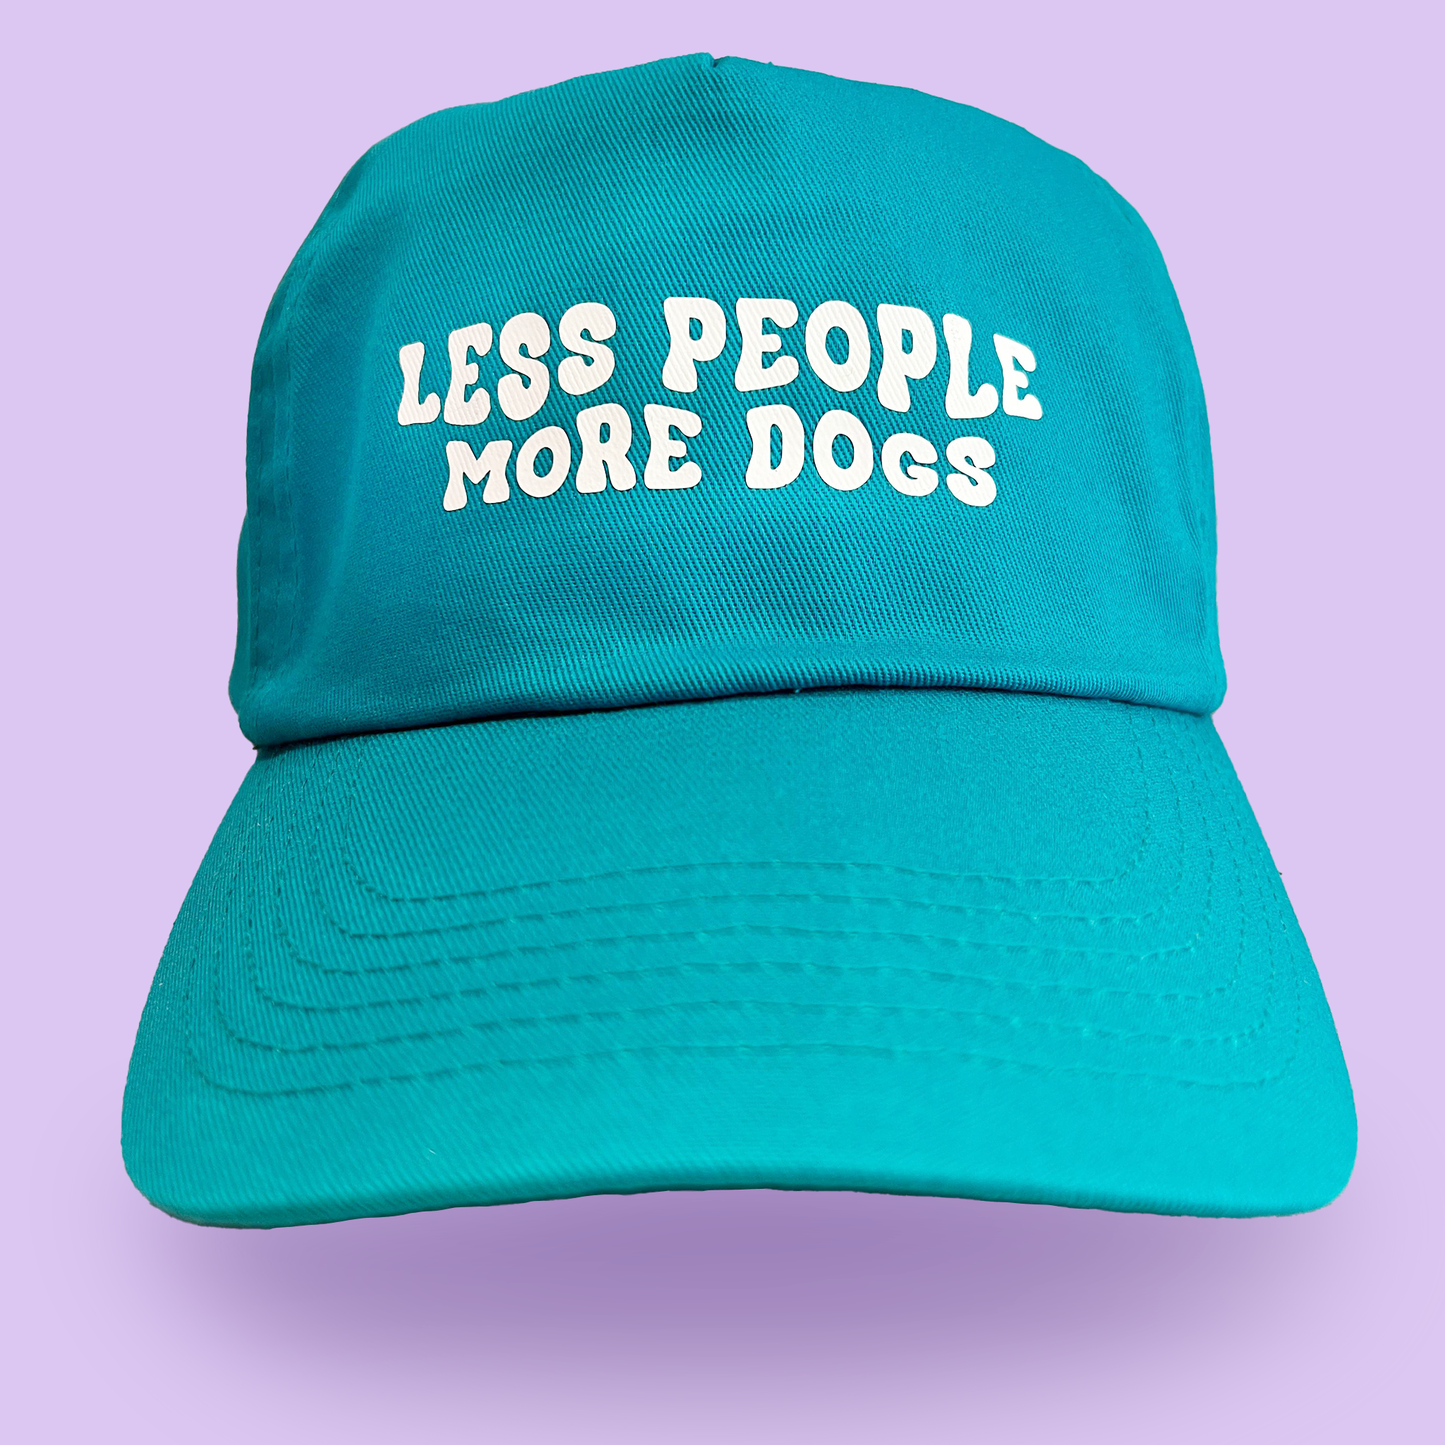 "Less people more dogs" cap